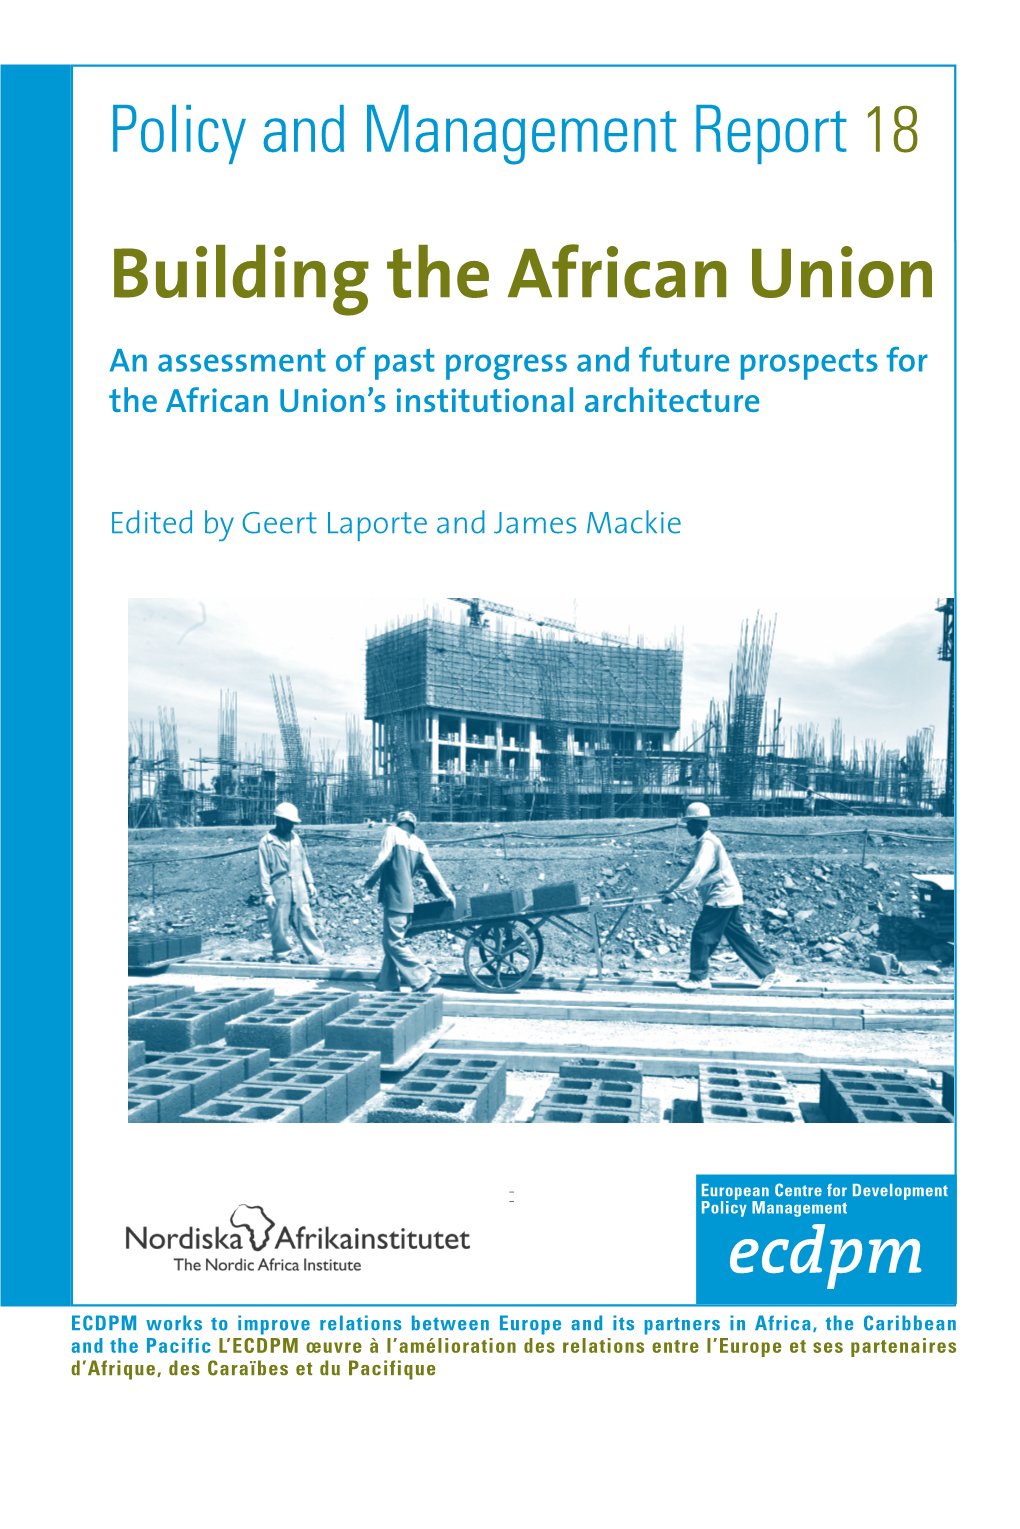 Policy and Management Report 18 Building the Africanpolicy 18 Building Union Report and Management Policy and Management Report 18